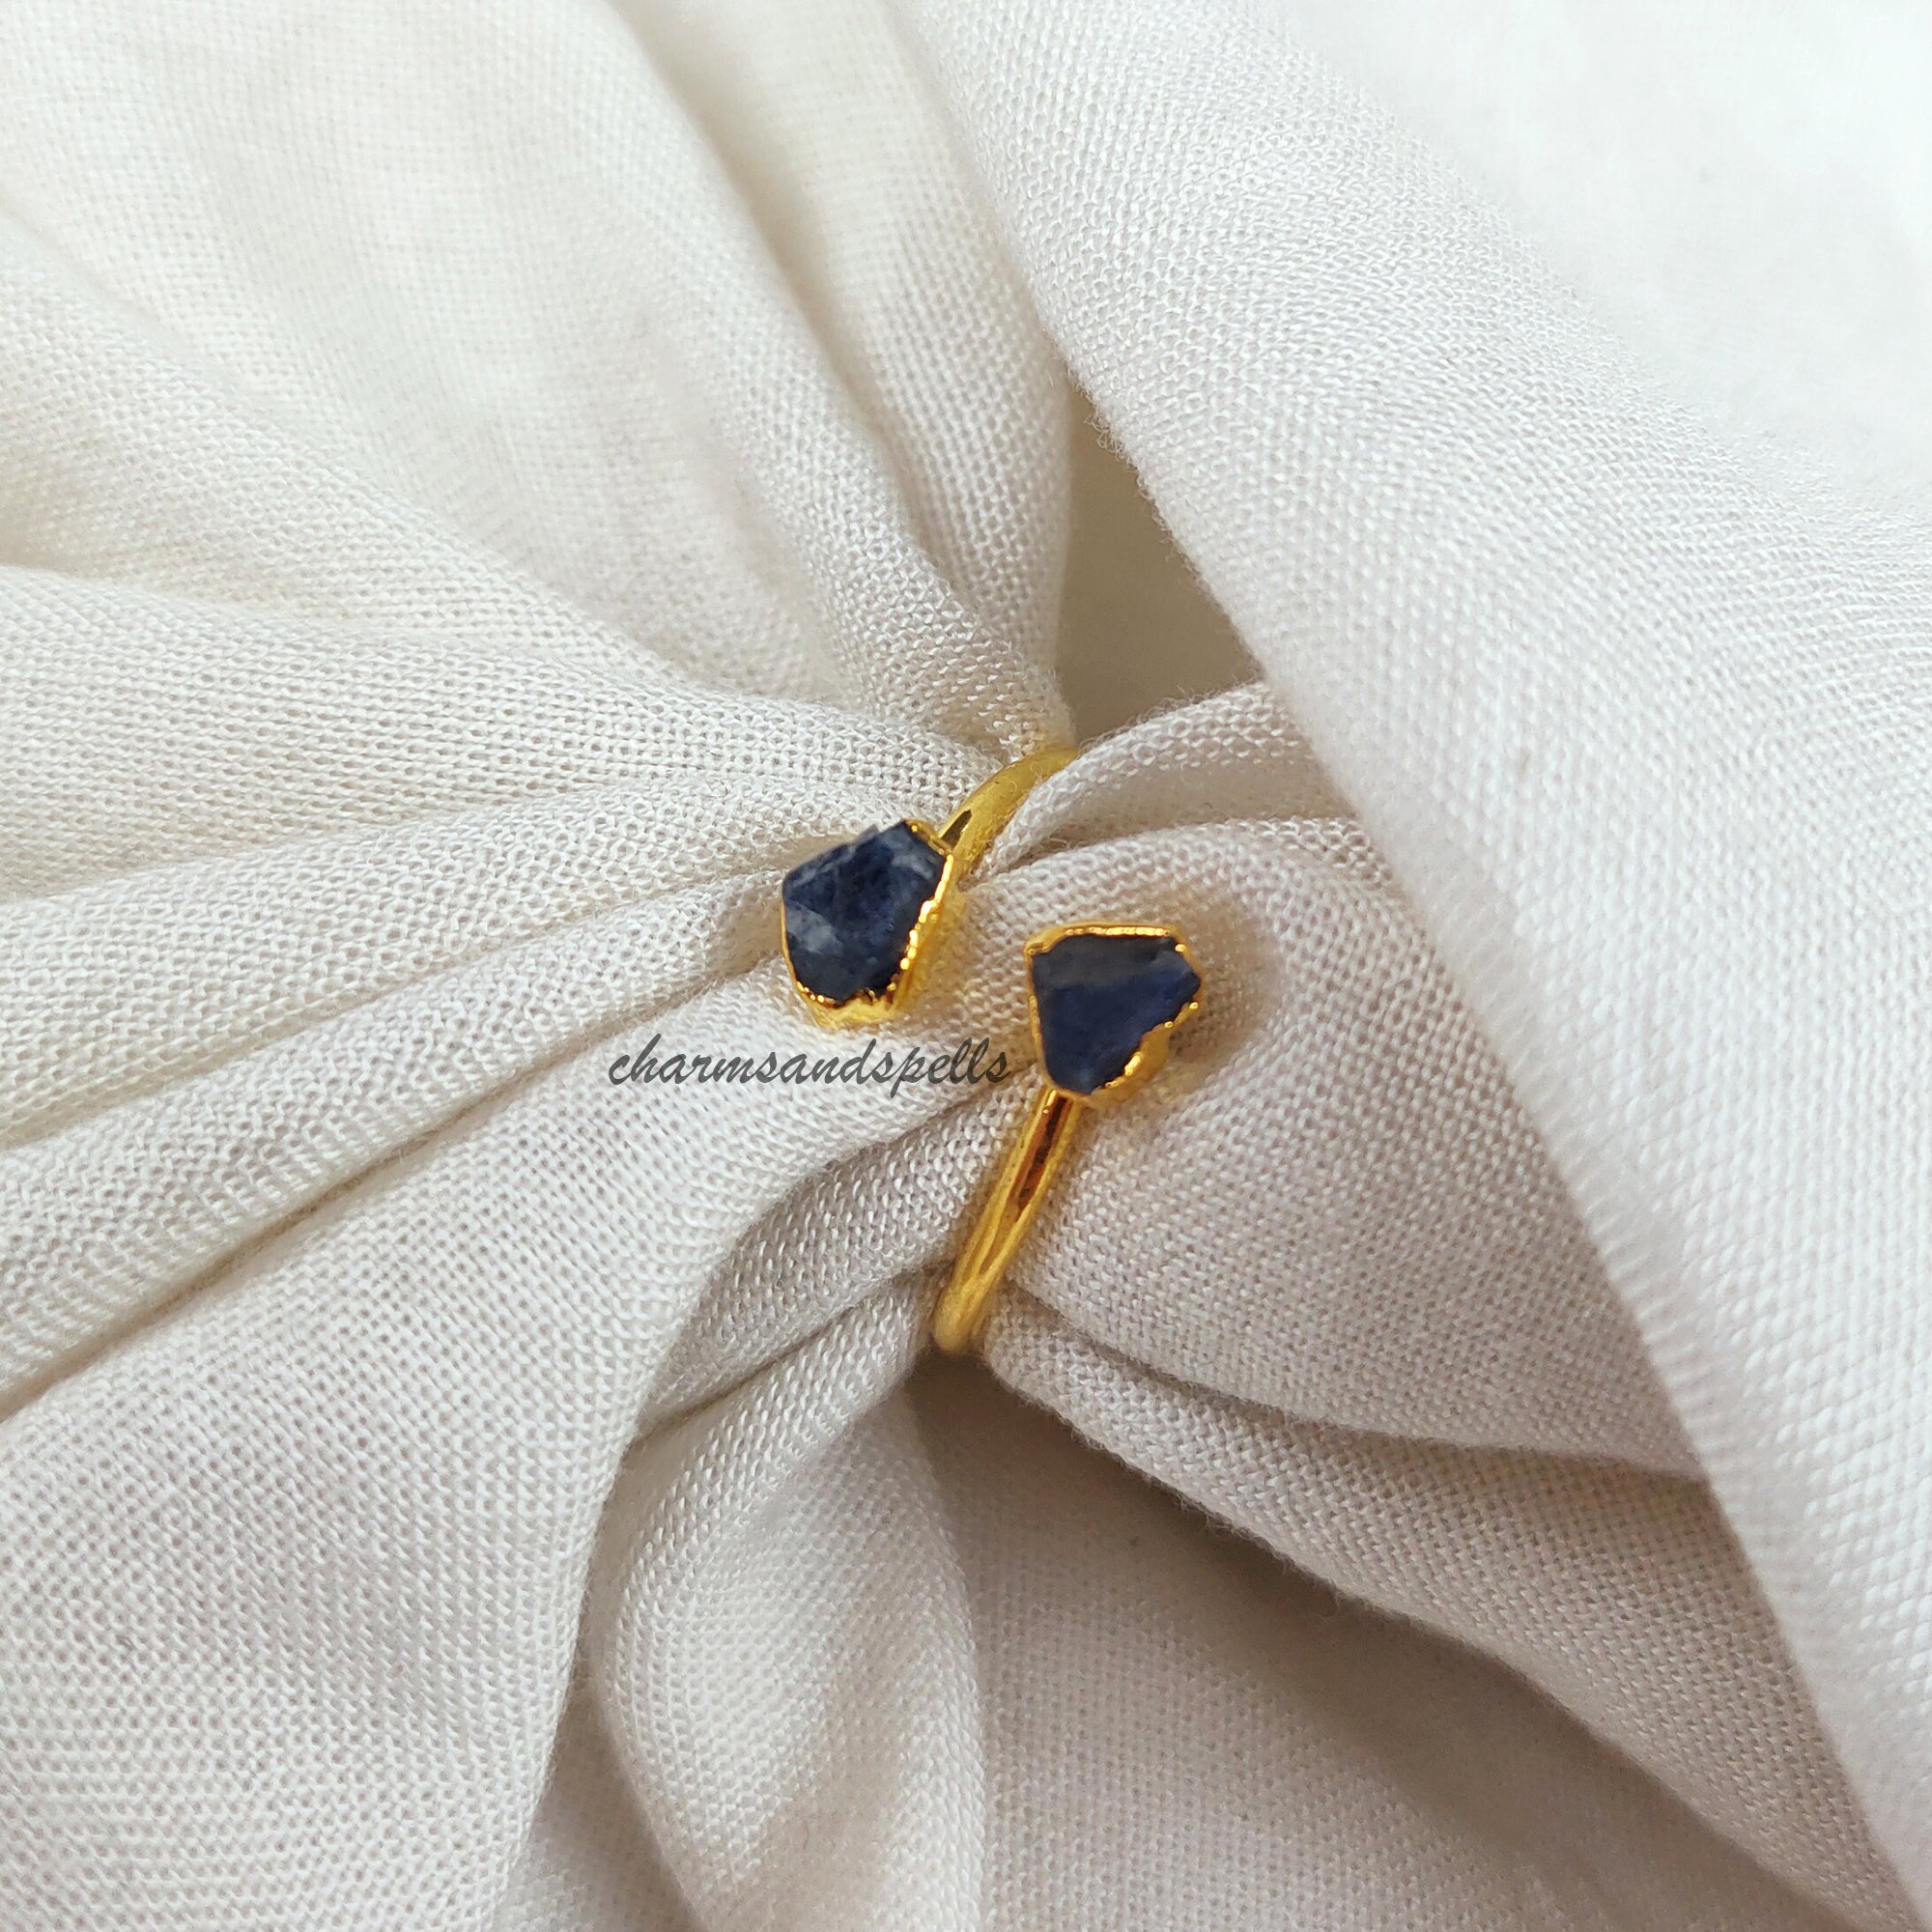 Natural Blue Sapphire Ring, Boho Jewelry, Real Raw Sapphire Ring, Dainty Ring, Birthstone Jewelry, Handmade Stone Ring, Engagement Ring